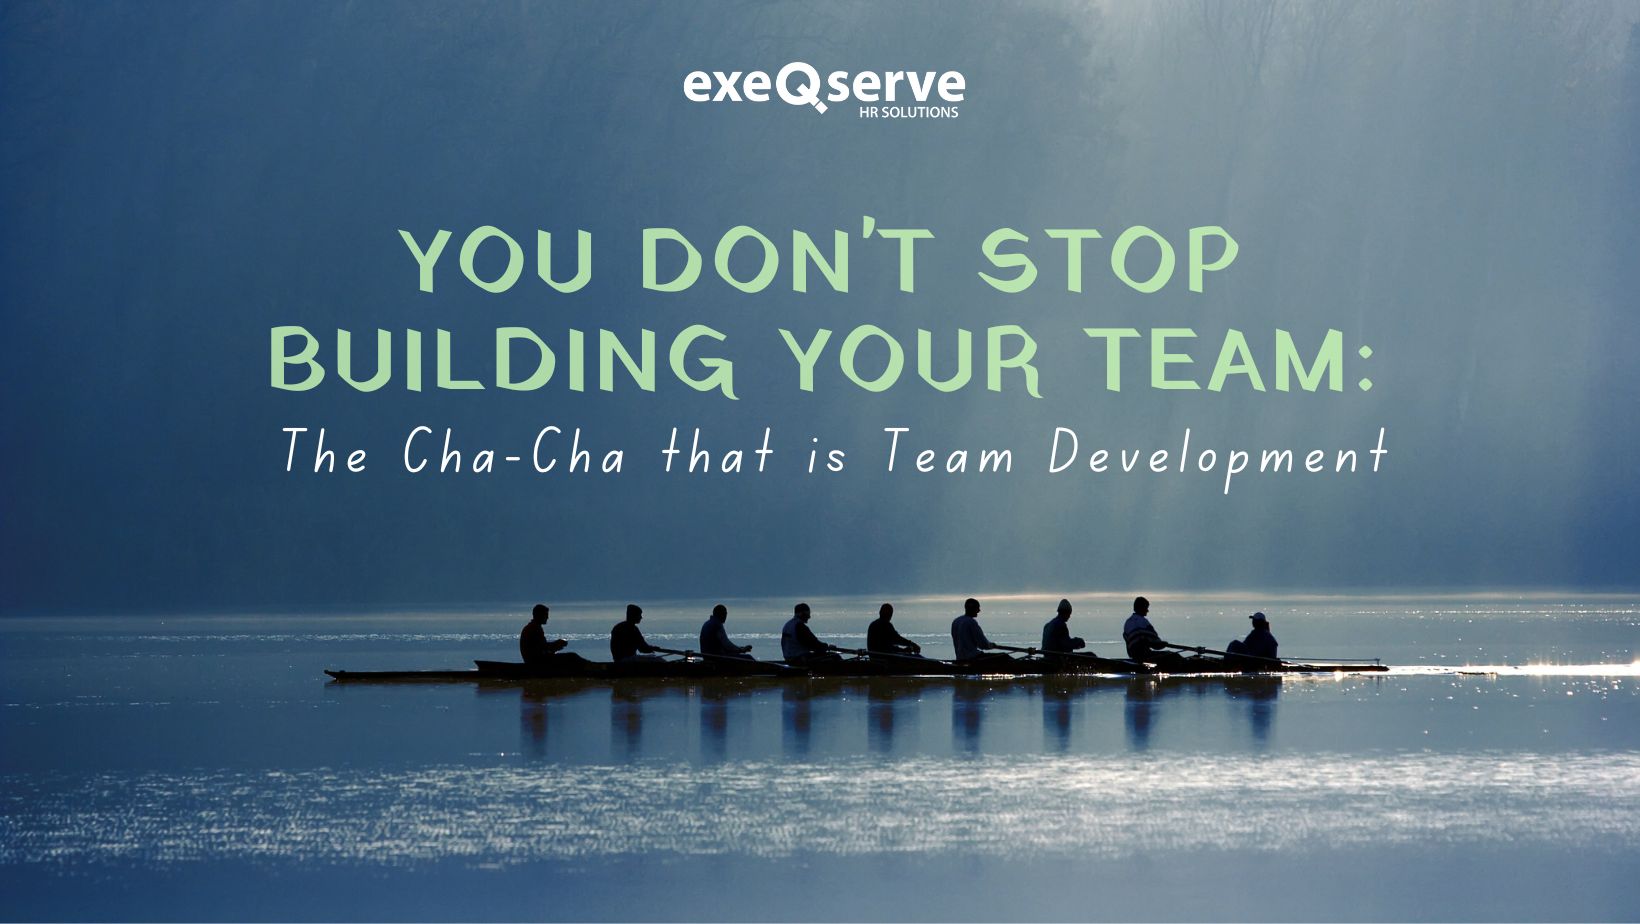 You Don't Stop Building Your Team: The Cha-cha that is Team Development